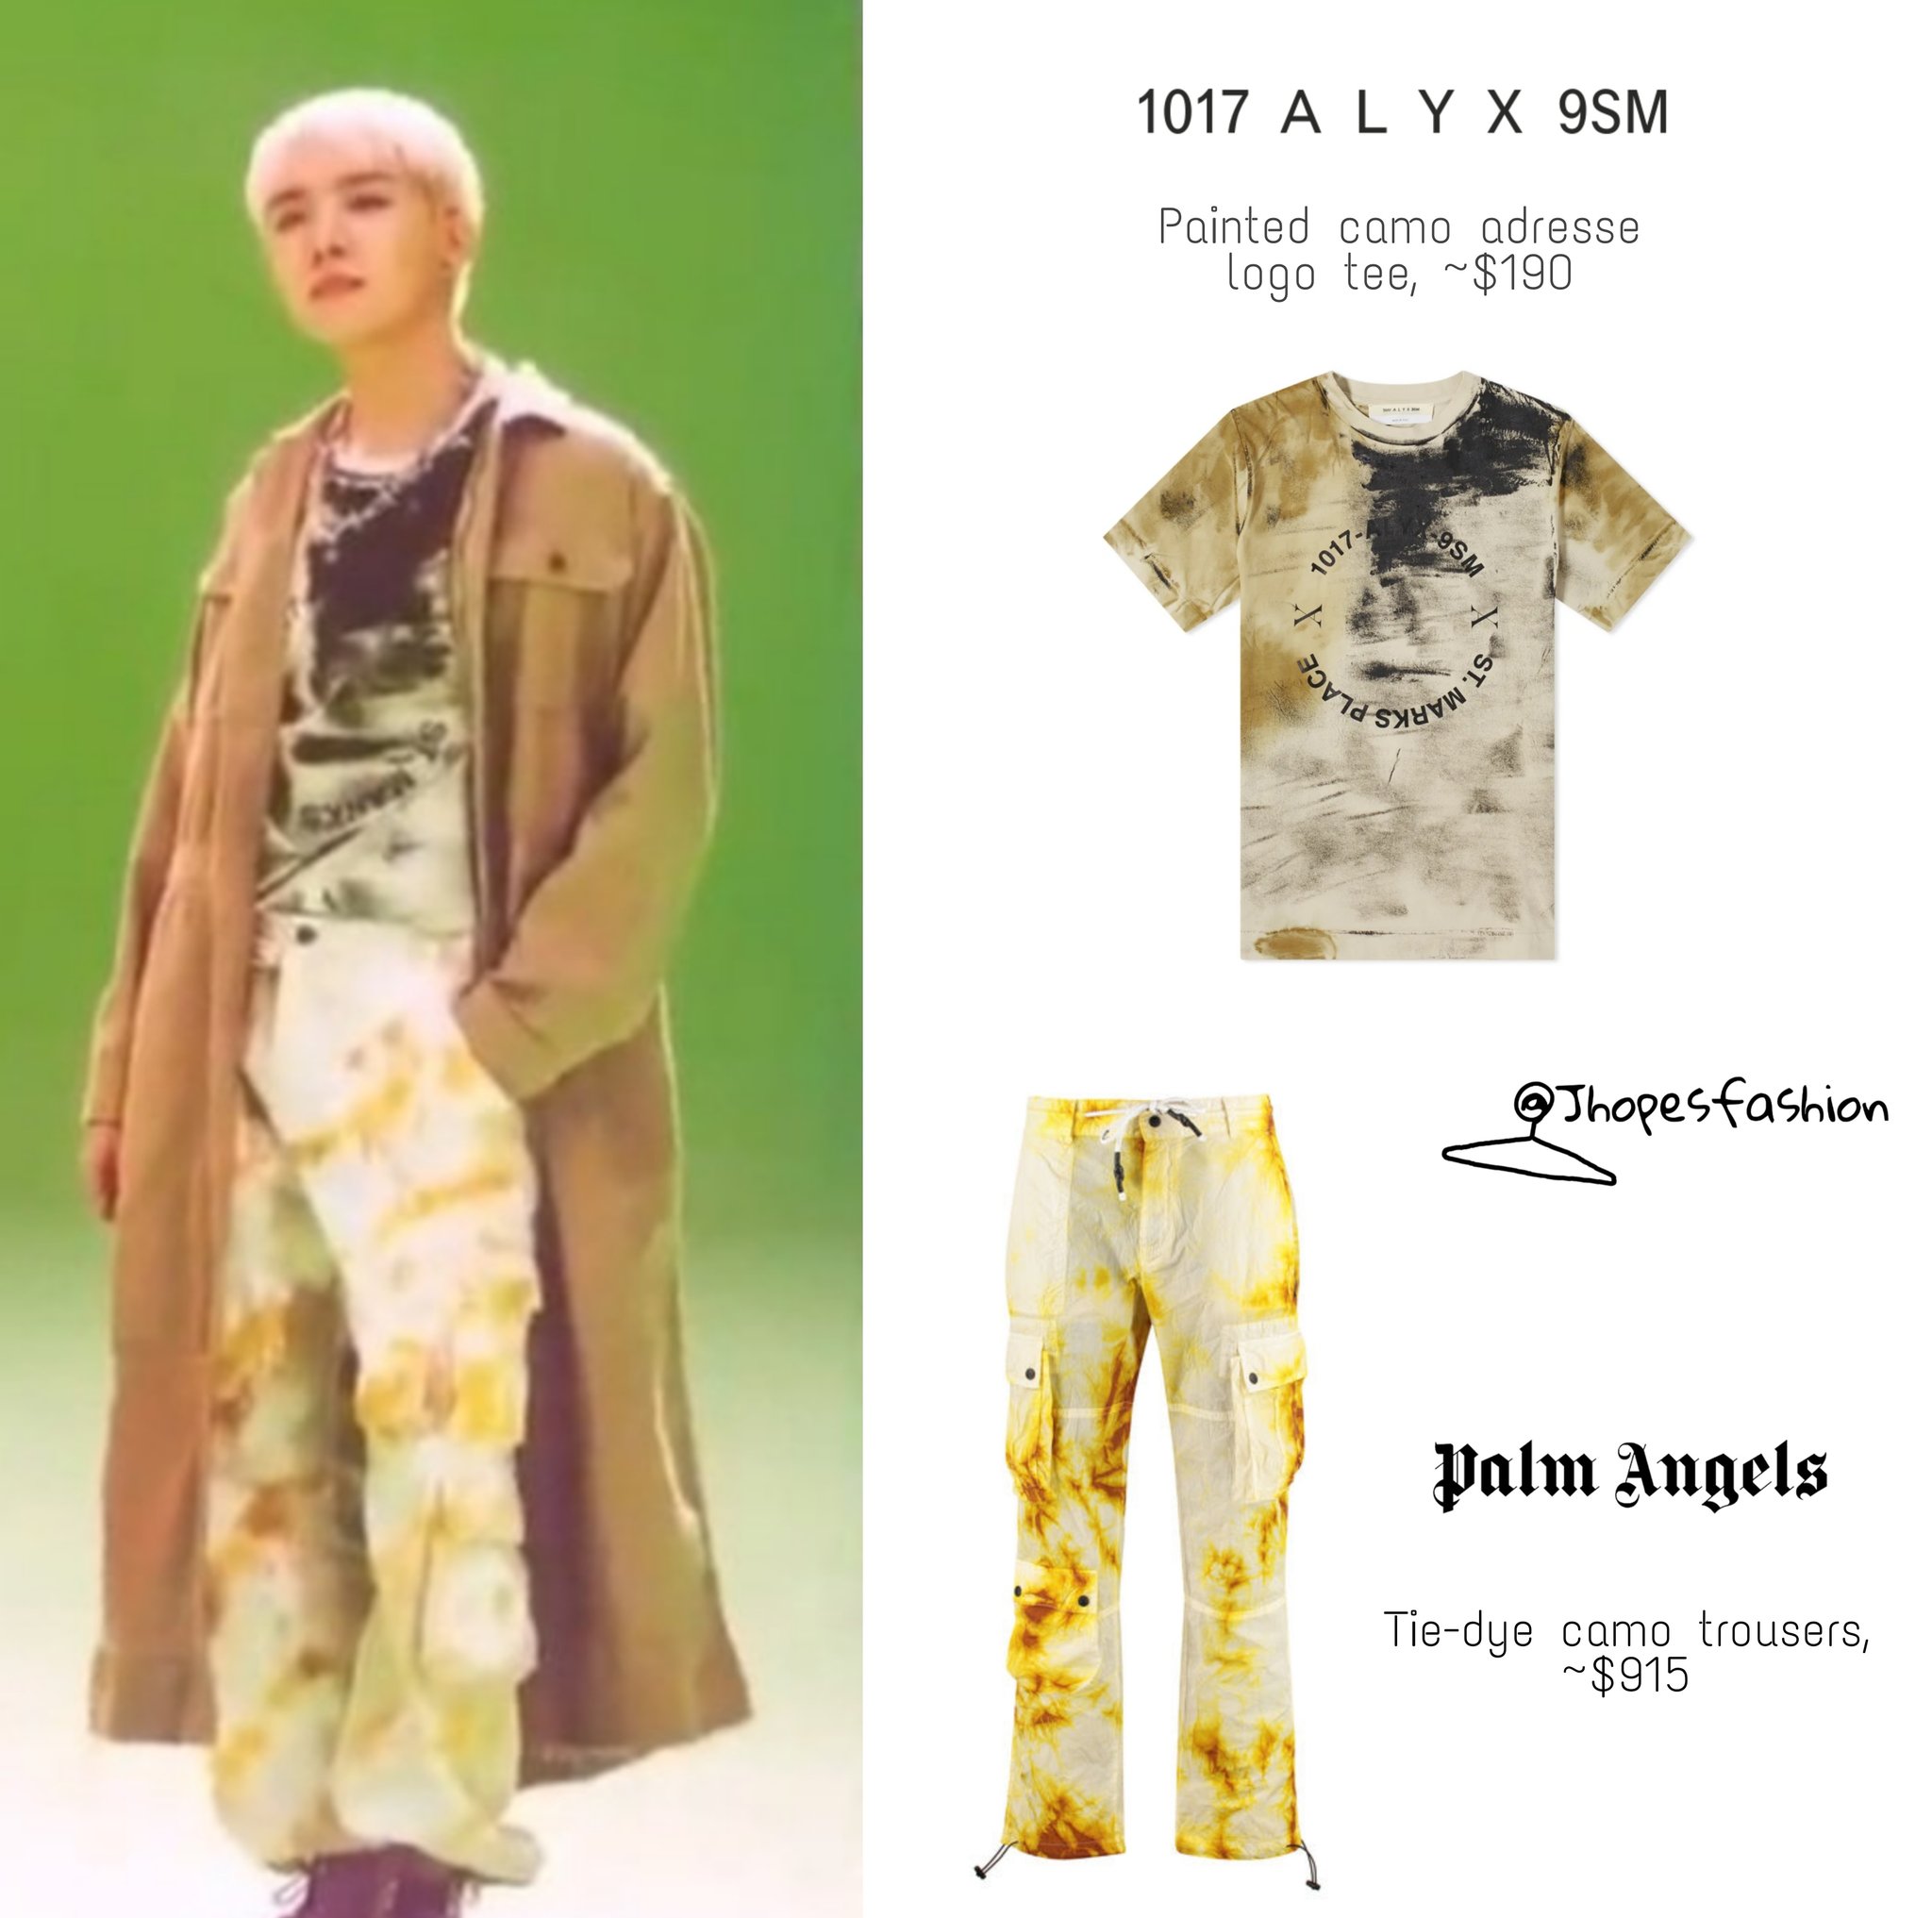 J-hope's closet on Instagram: “J-hope's Louis Vuitton denim jacket and  inside out t-shirt 200723 - Twitter post #Jho…